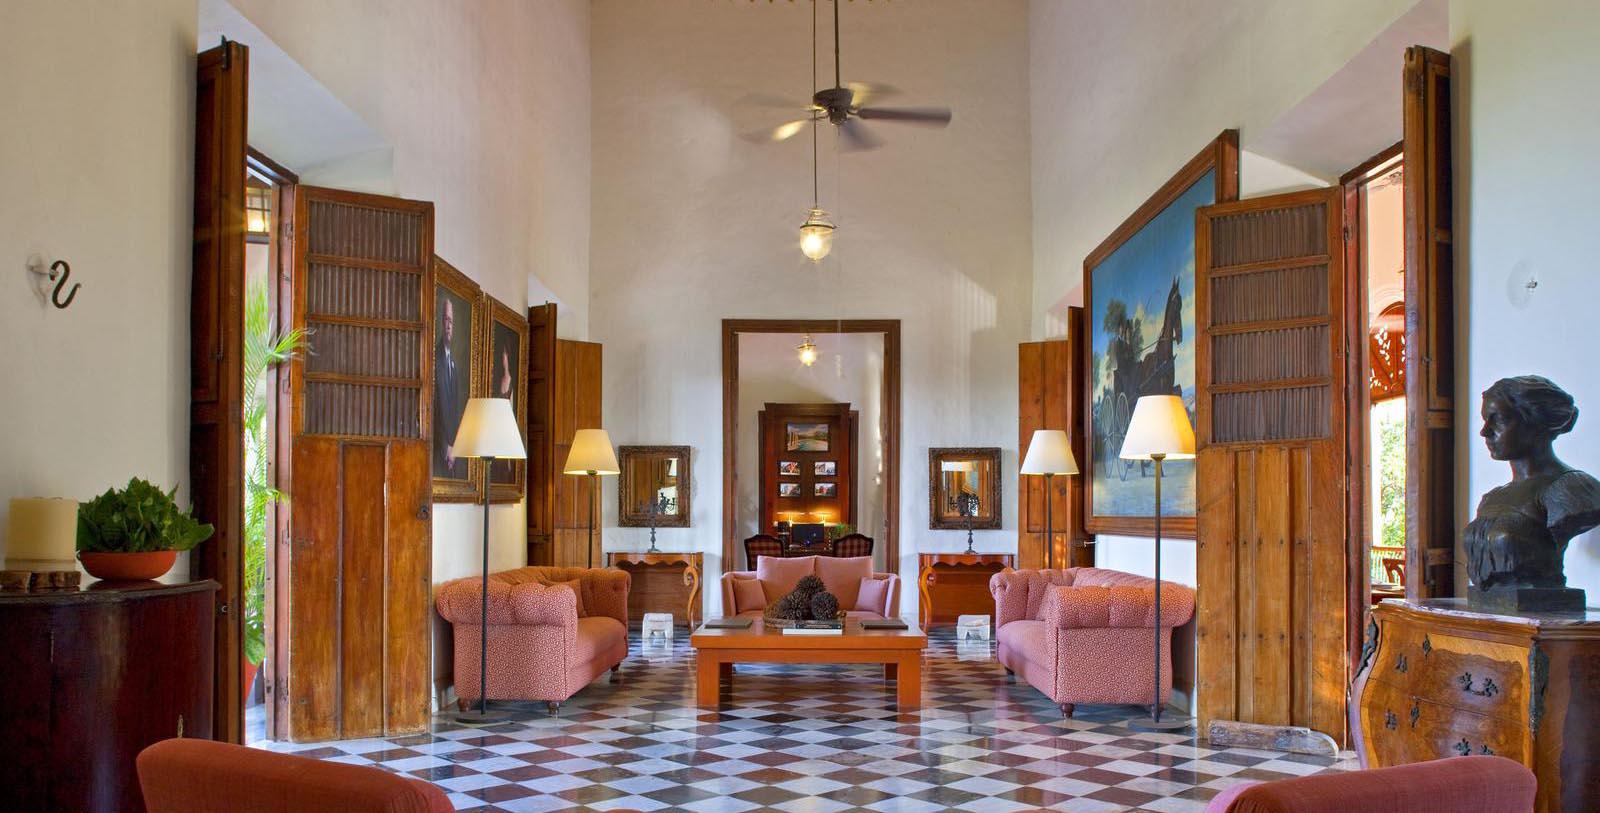 Discover the Spanish Colonial architecture of this terrific historic destination.